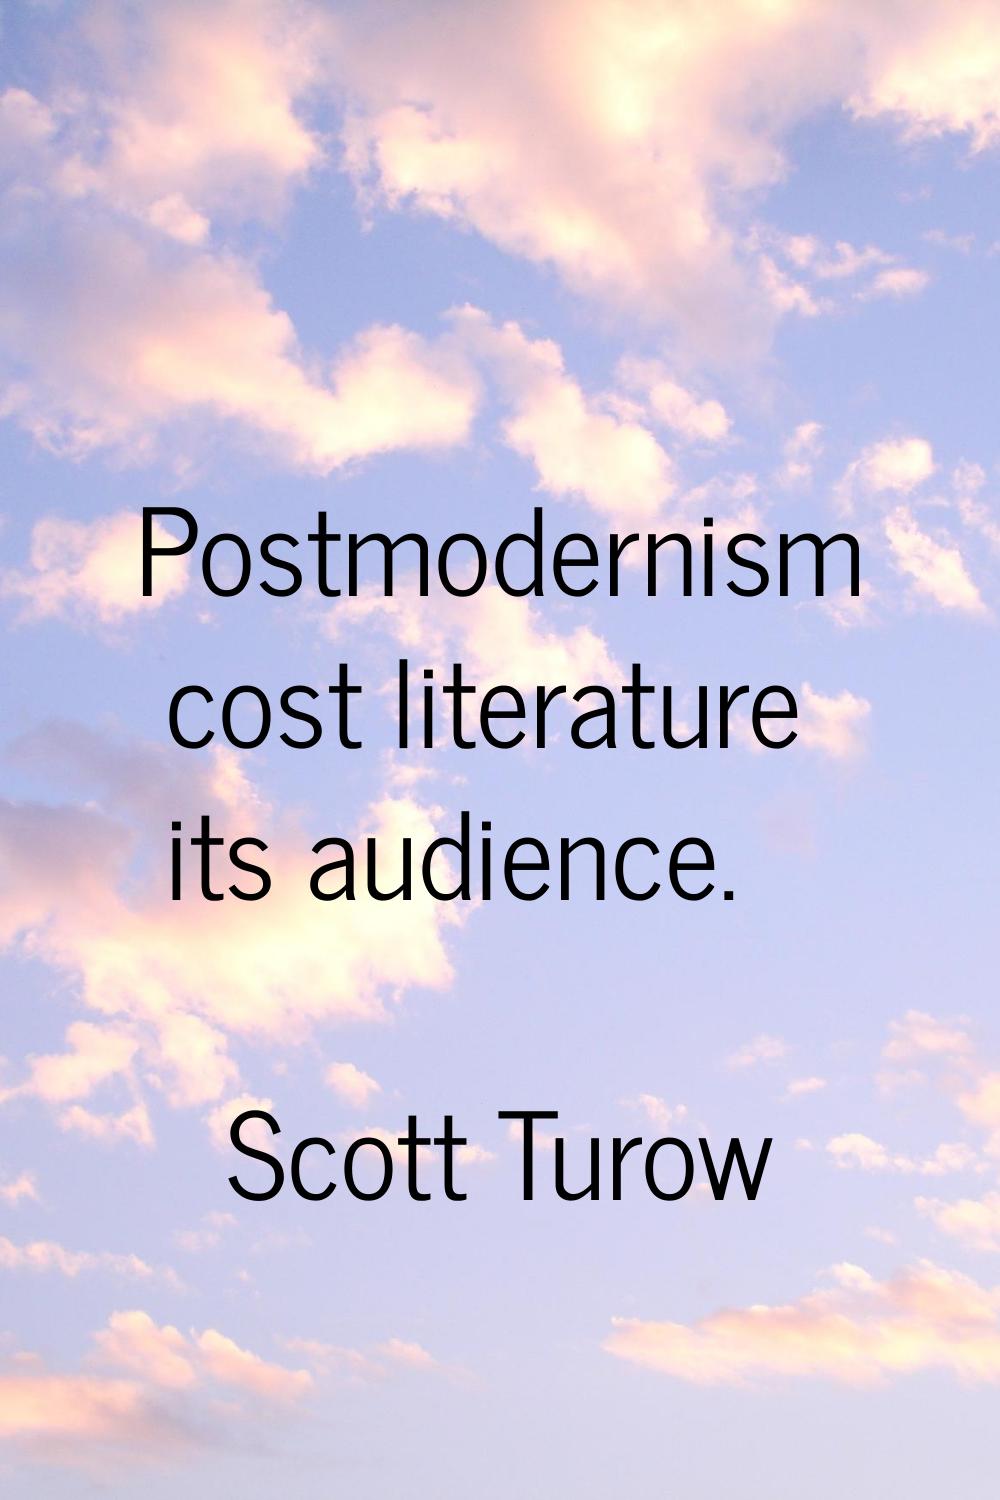 Postmodernism cost literature its audience.